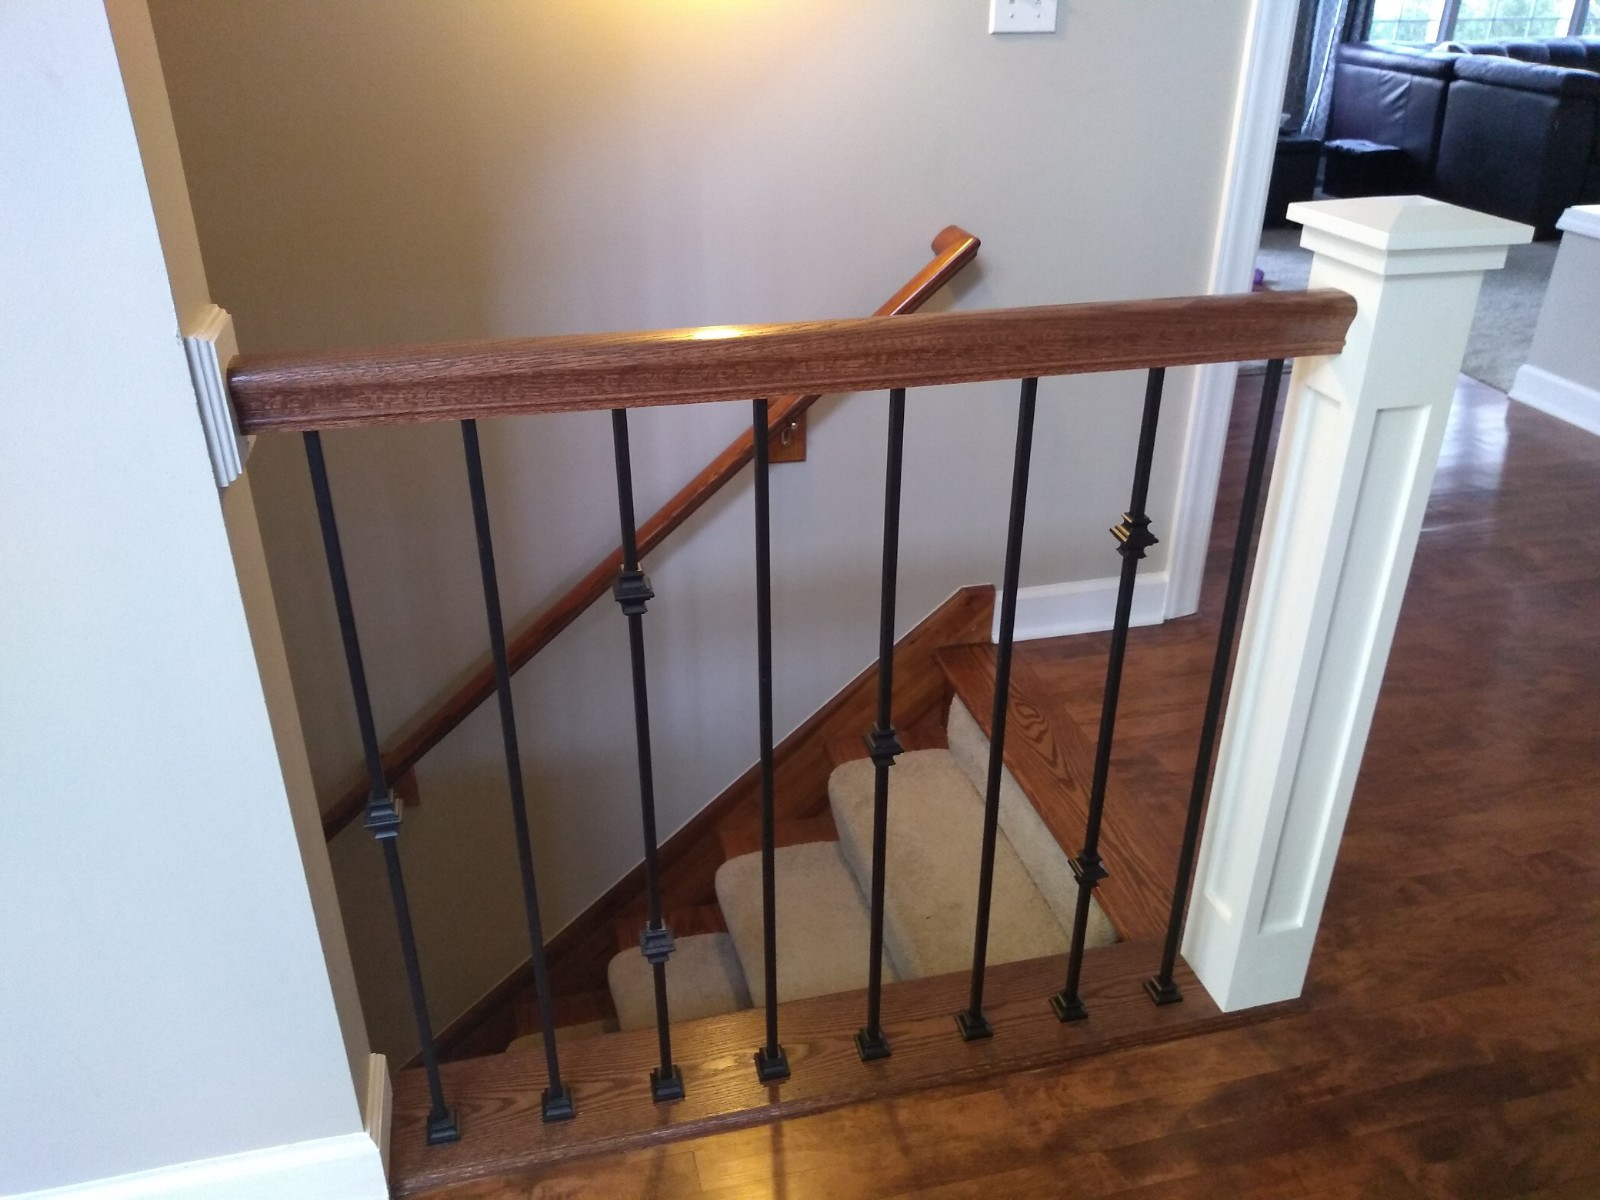 White newels with oak rails and iron balusters